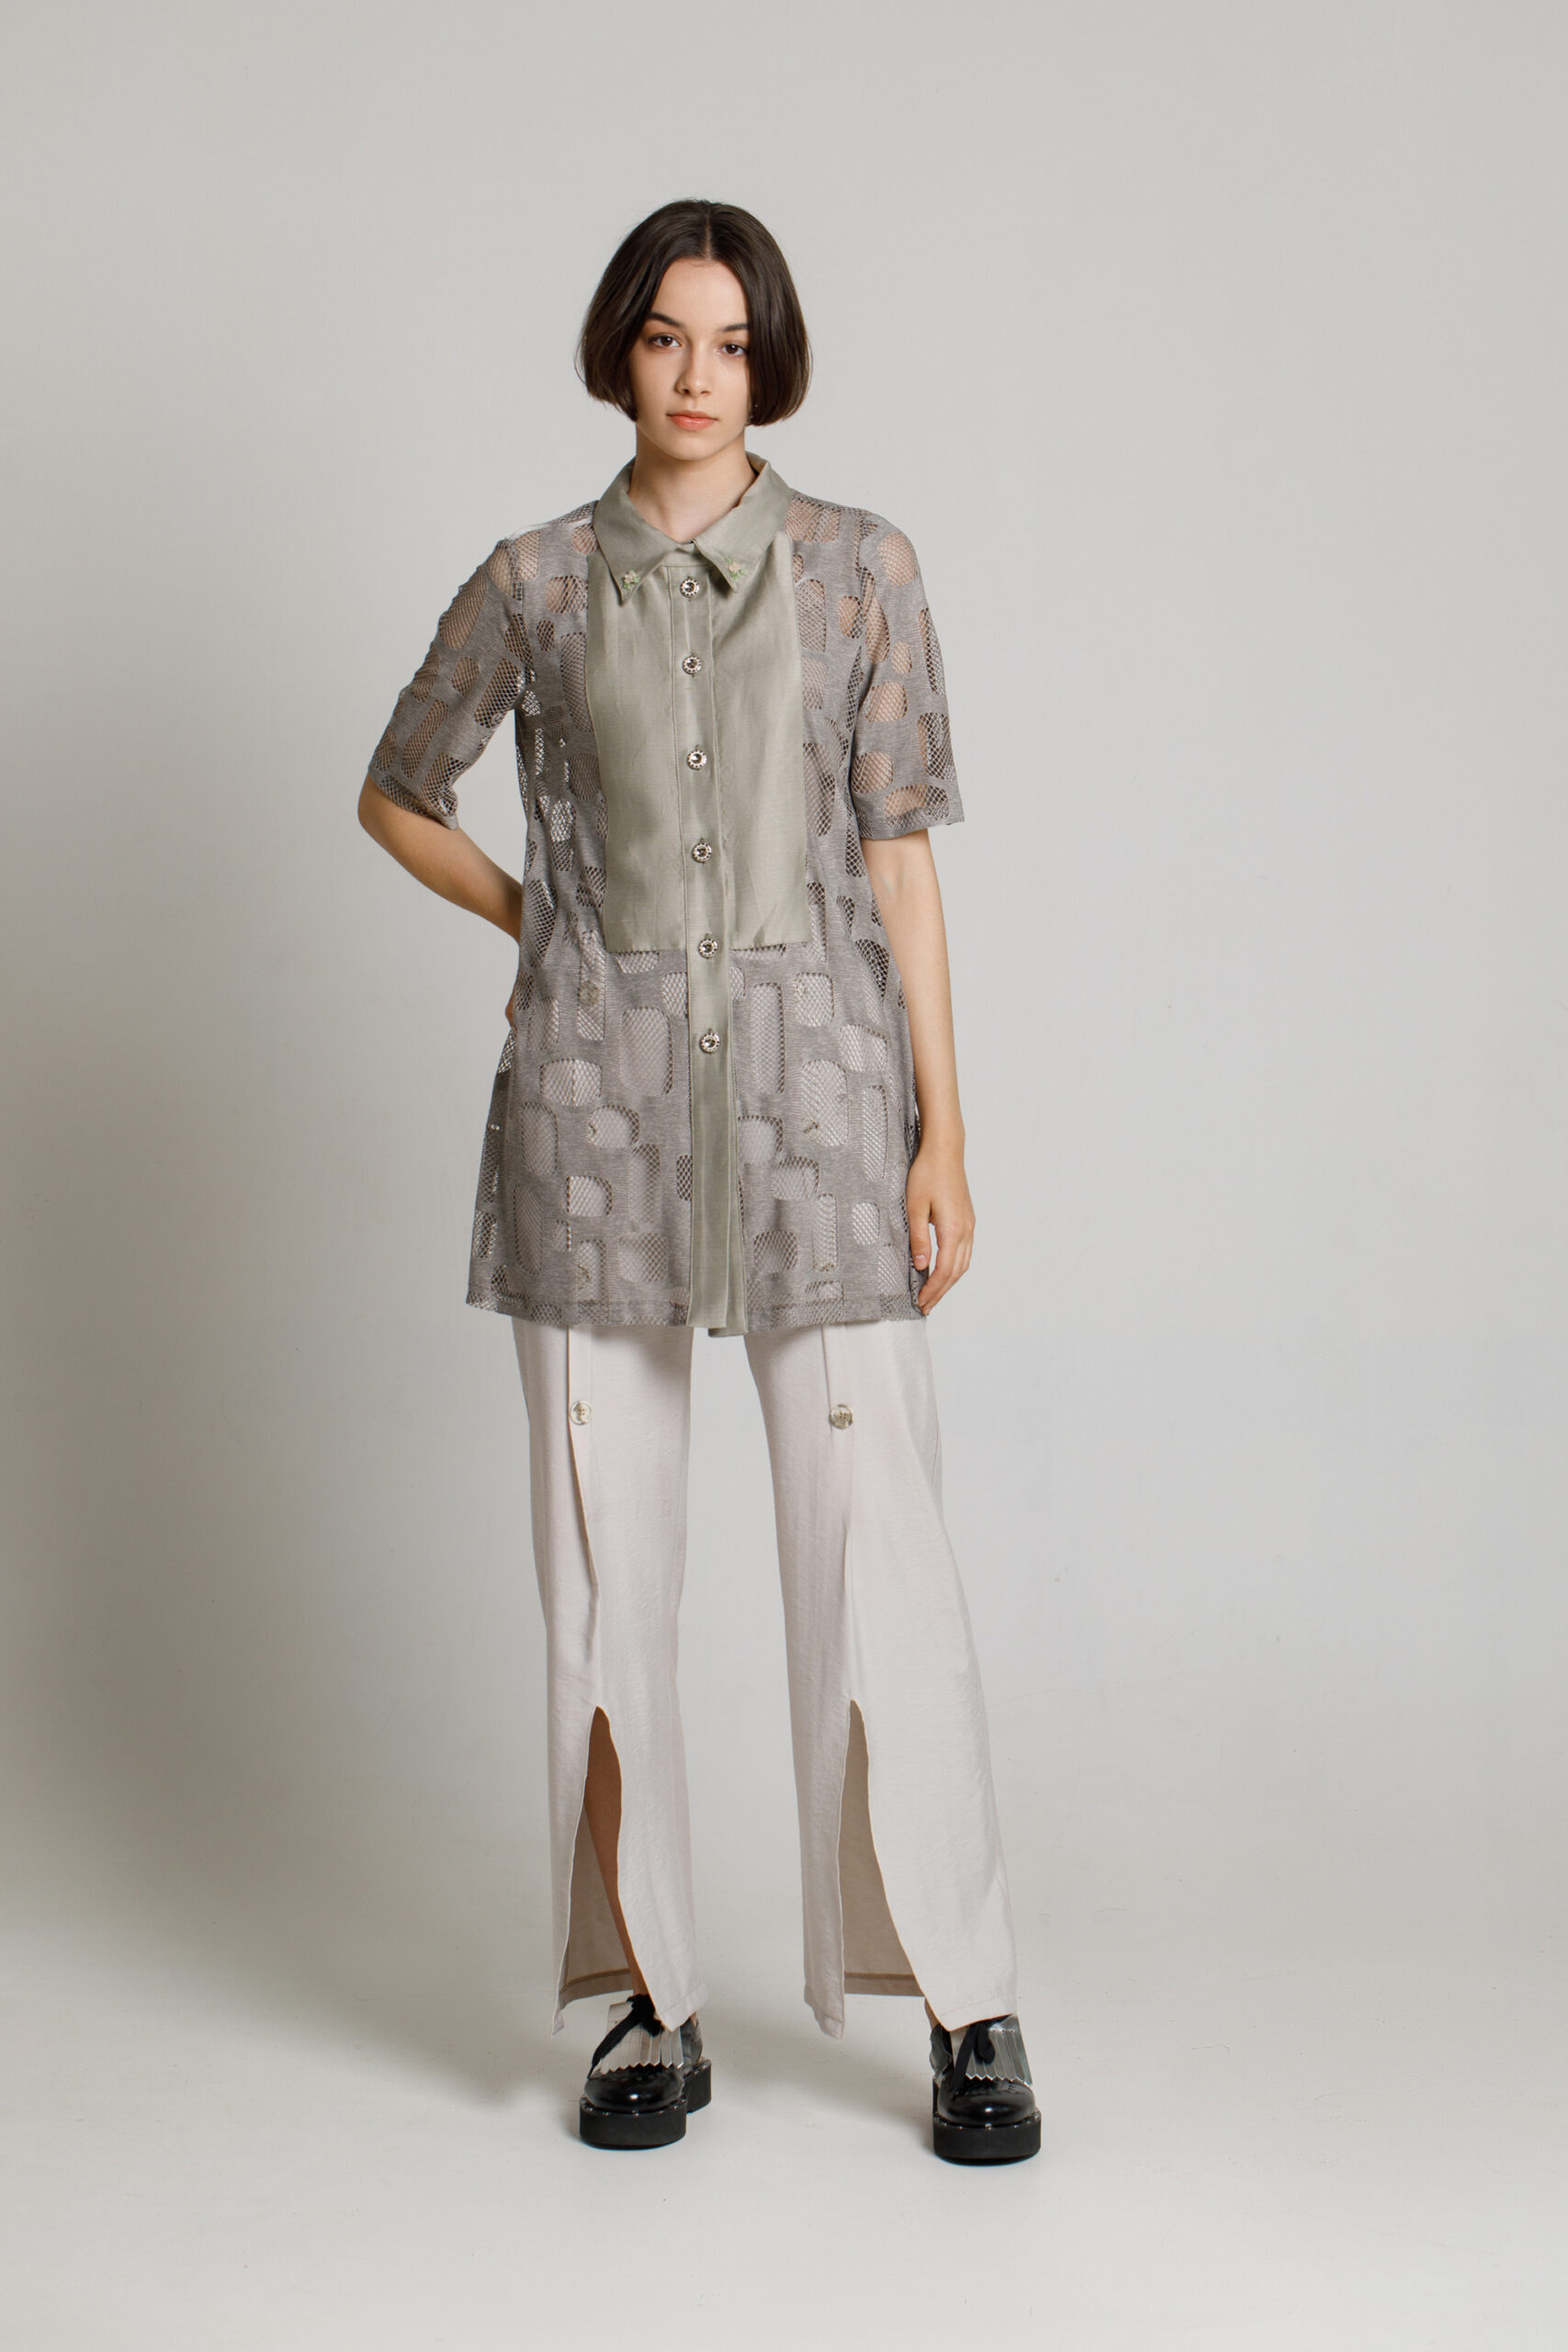 AMIRA casual greige shirt made of lace and linen. Natural fabrics, original design, handmade embroidery